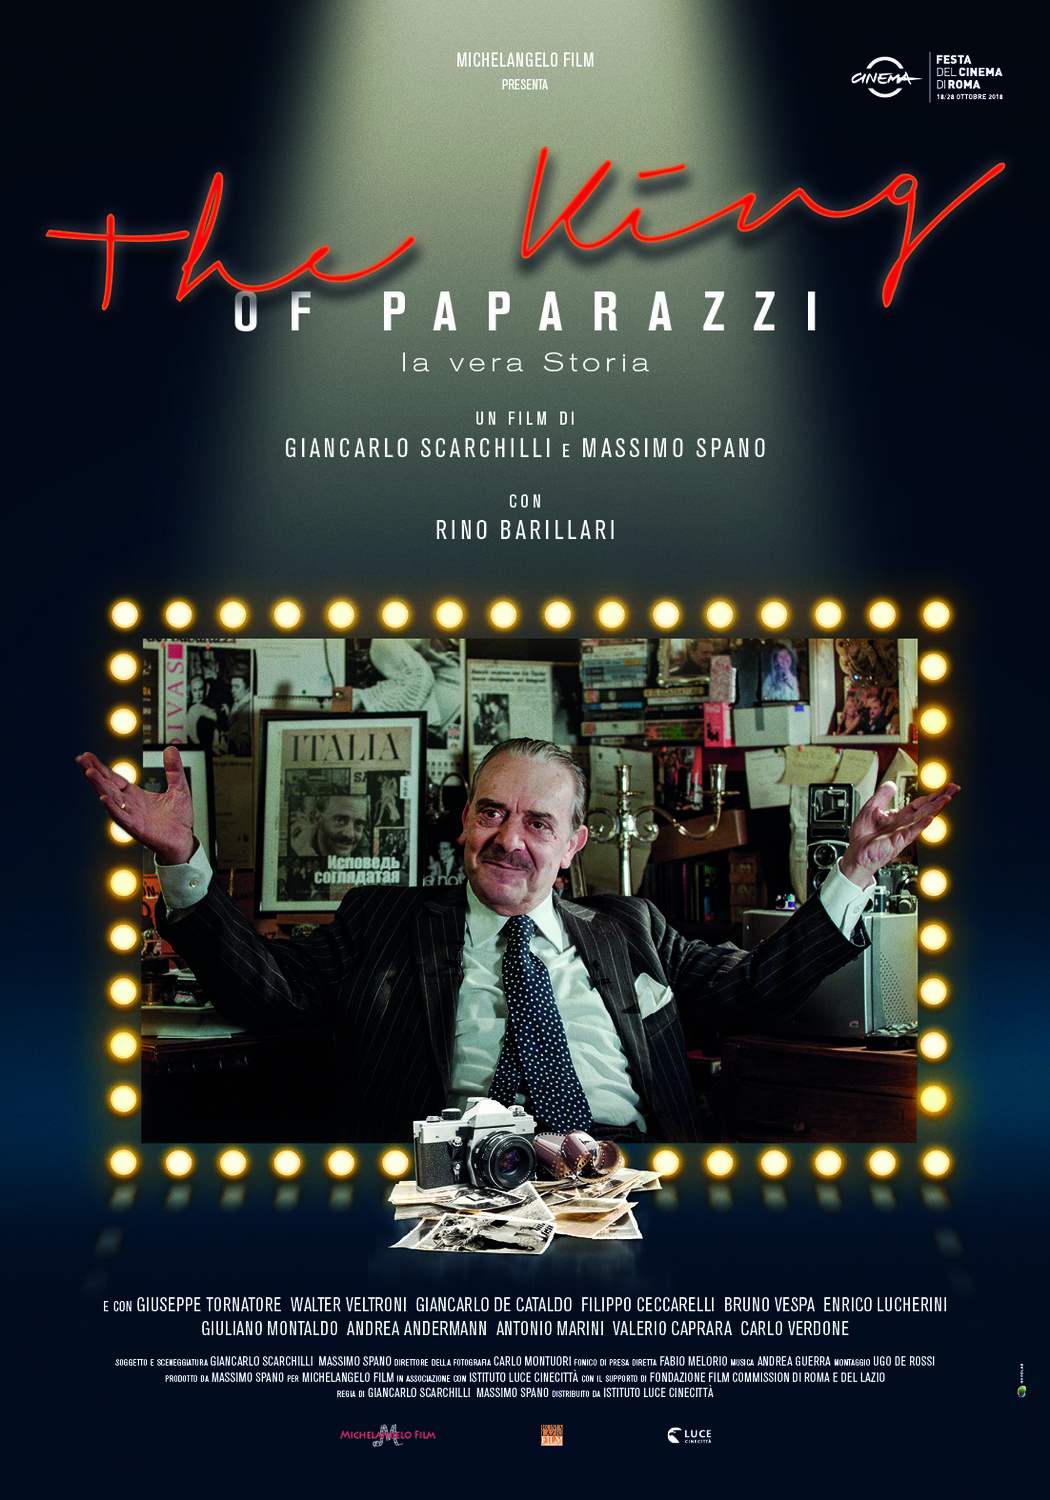 Extra Large Movie Poster Image for The King of Paparazzi - La Veraa Storia 